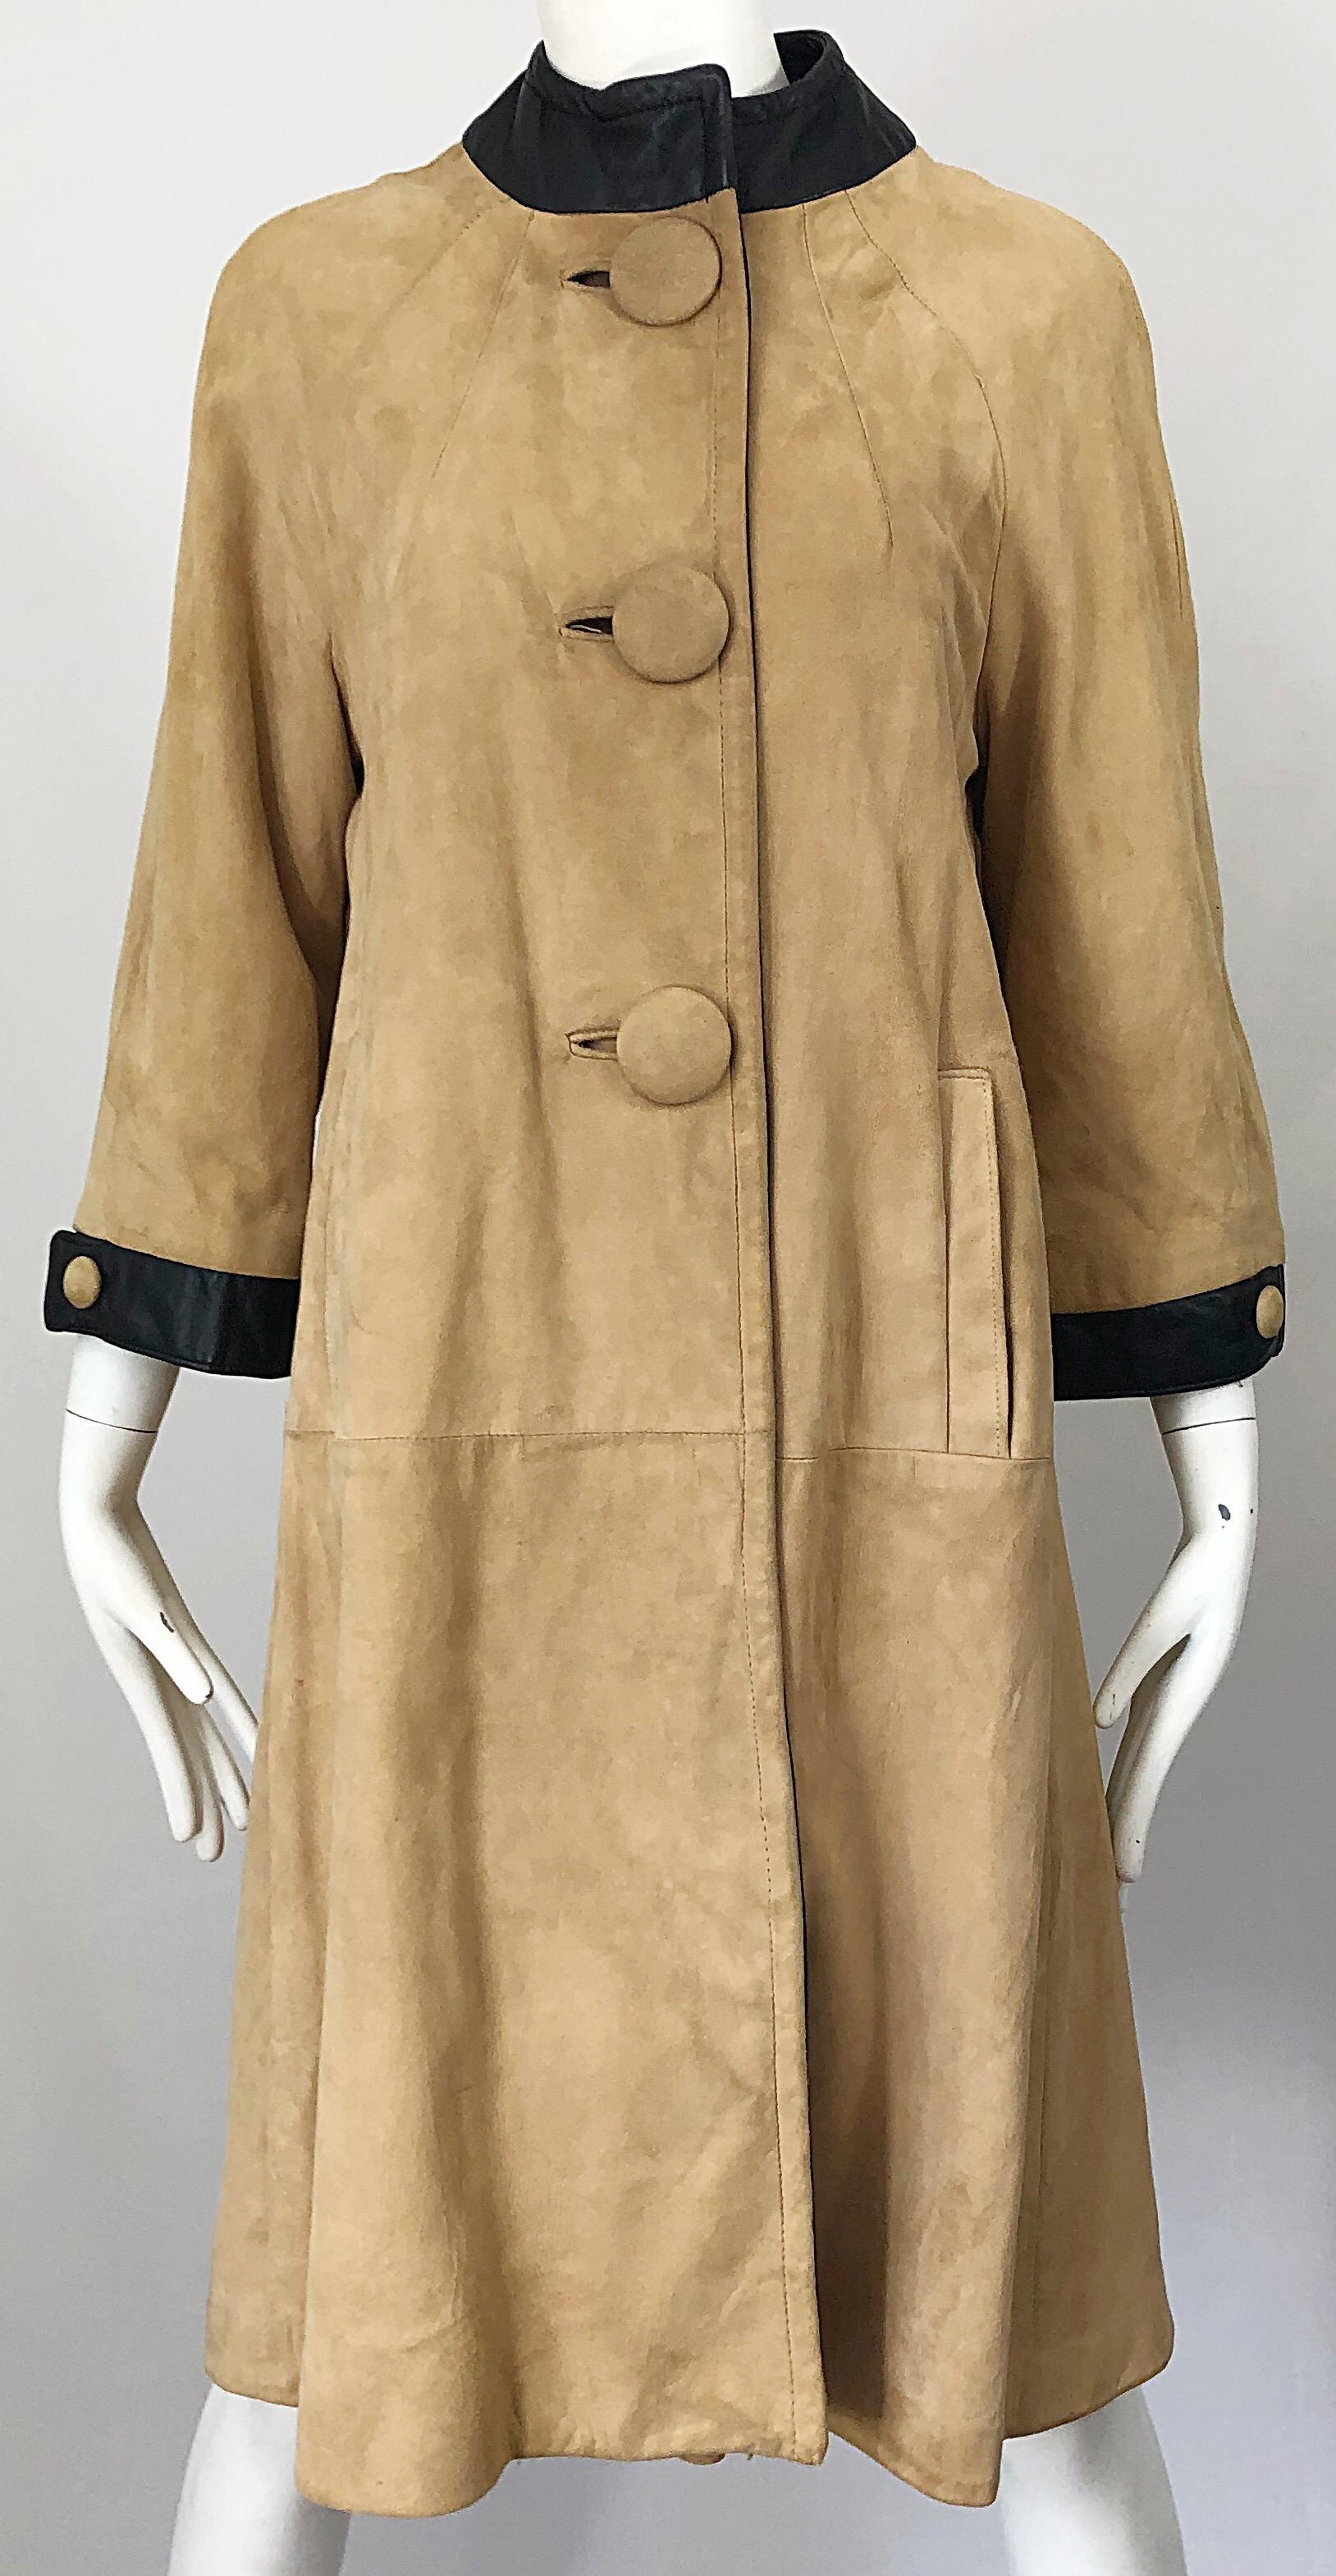 1960s Lillie Rubin Tan + Black Suede and Leather Vintage 60s Swing Jacket Coat 1